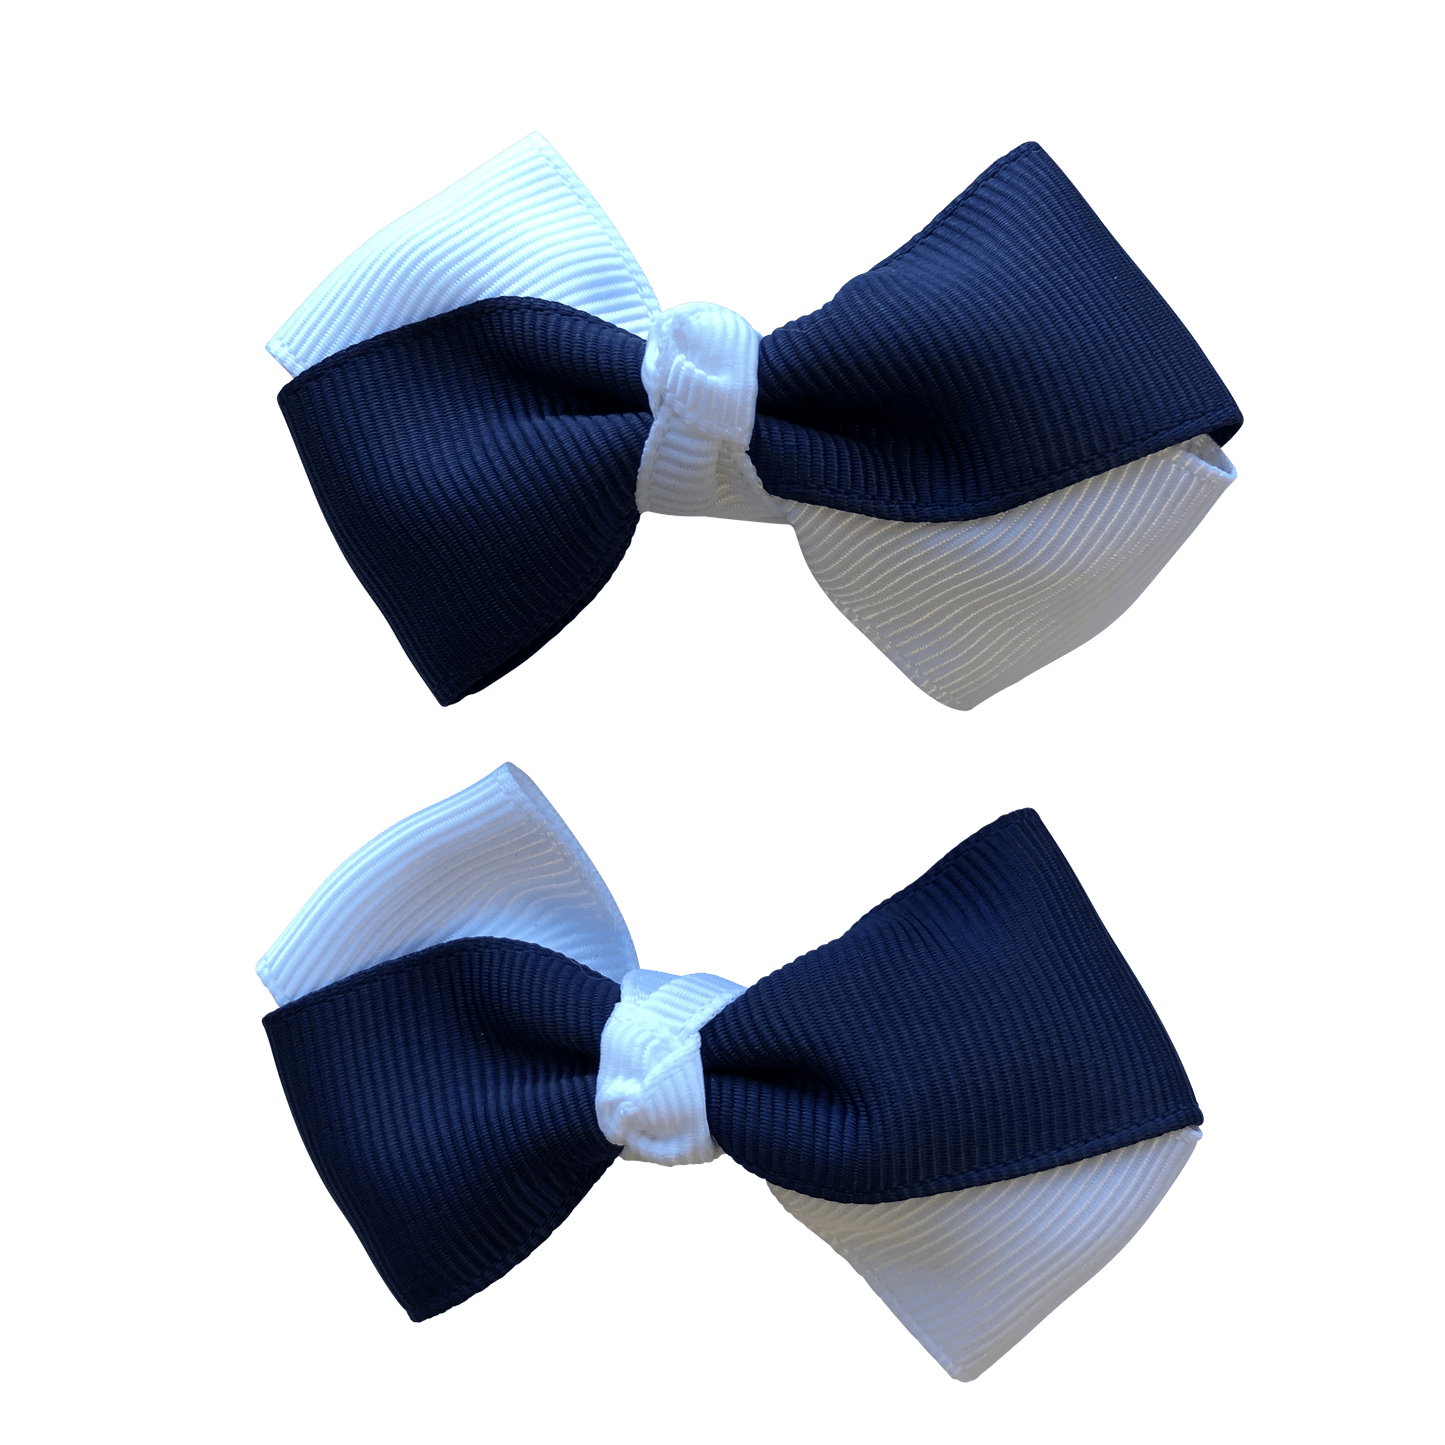 Navy & White Hair Accessories - Assorted Hair Accessories - School Uniform Hair Accessories - Ponytails and Fairytales